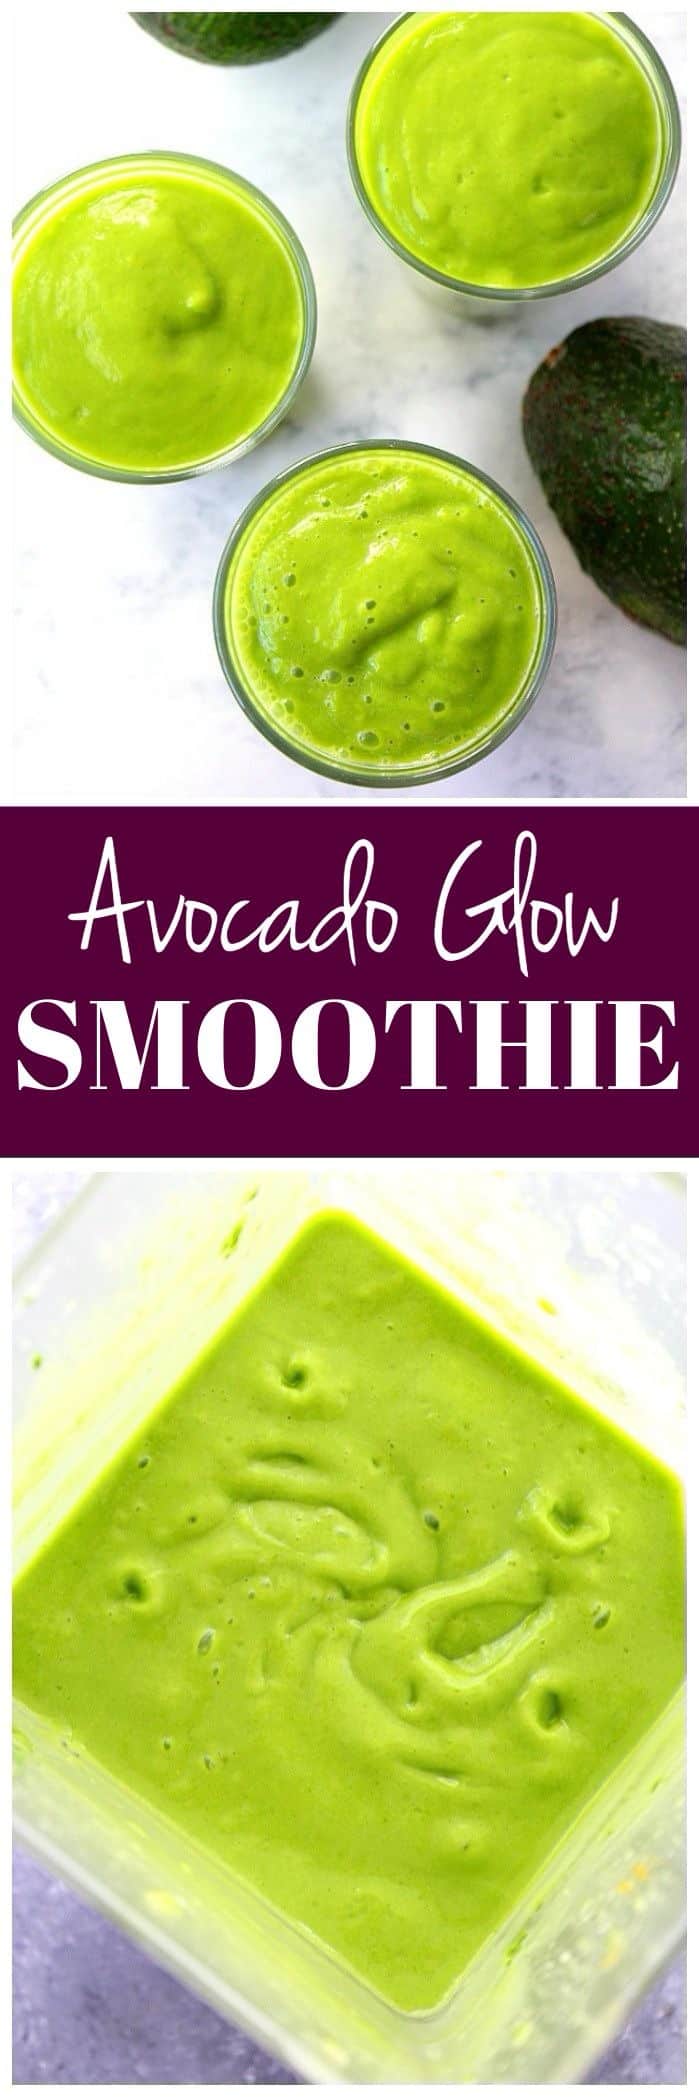 avocado green smoothie in blender and glasses